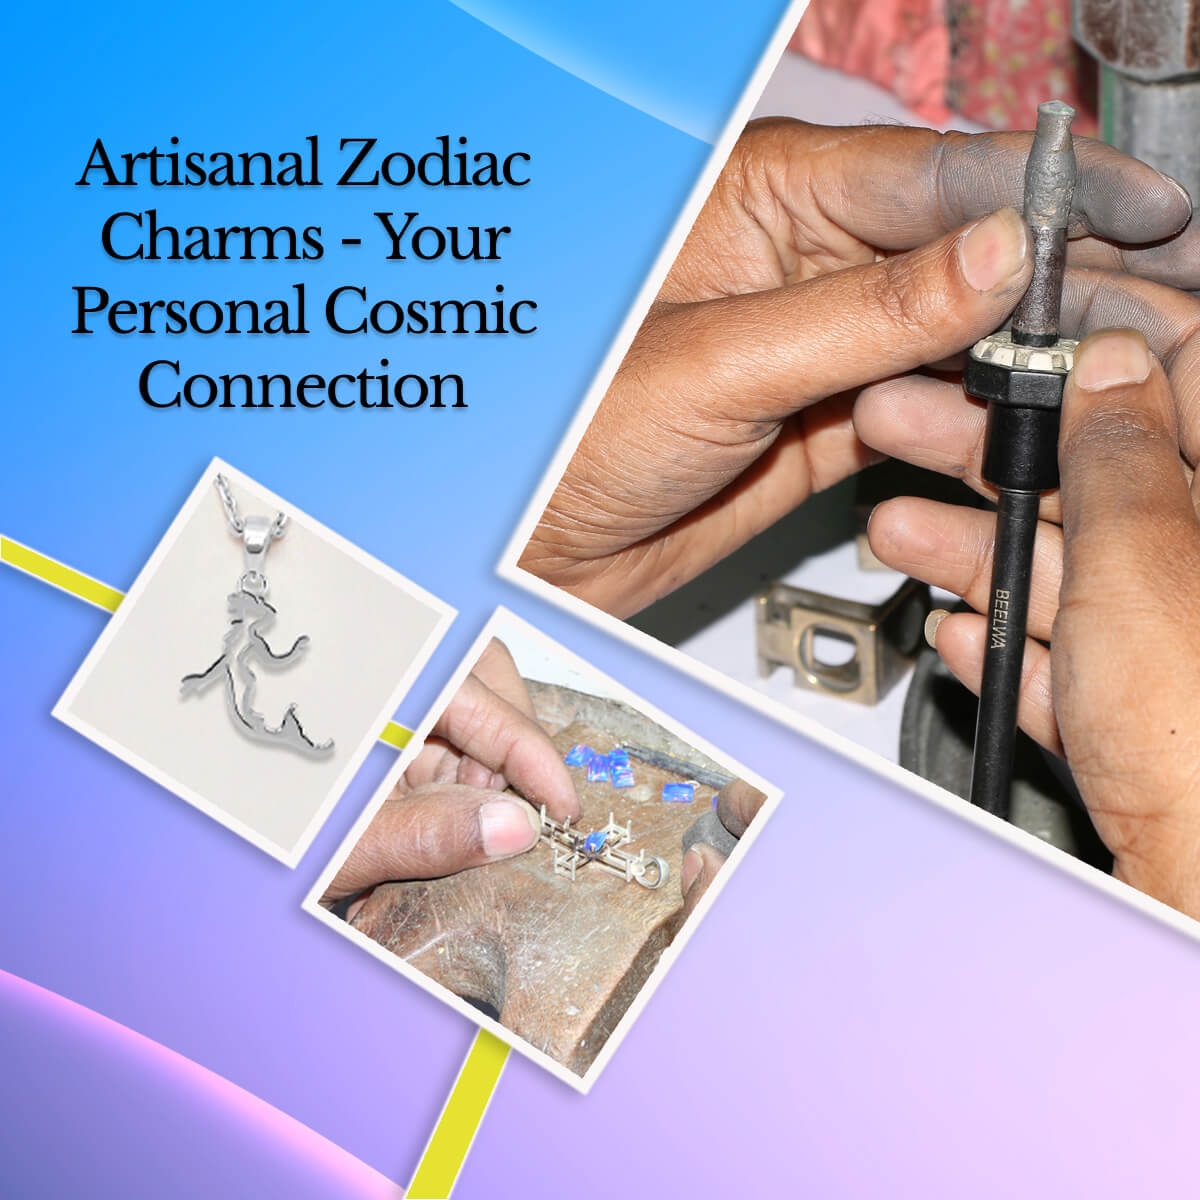 Crafting Customized Zodiac Sign Jewelry Merging Artistry and Astrology